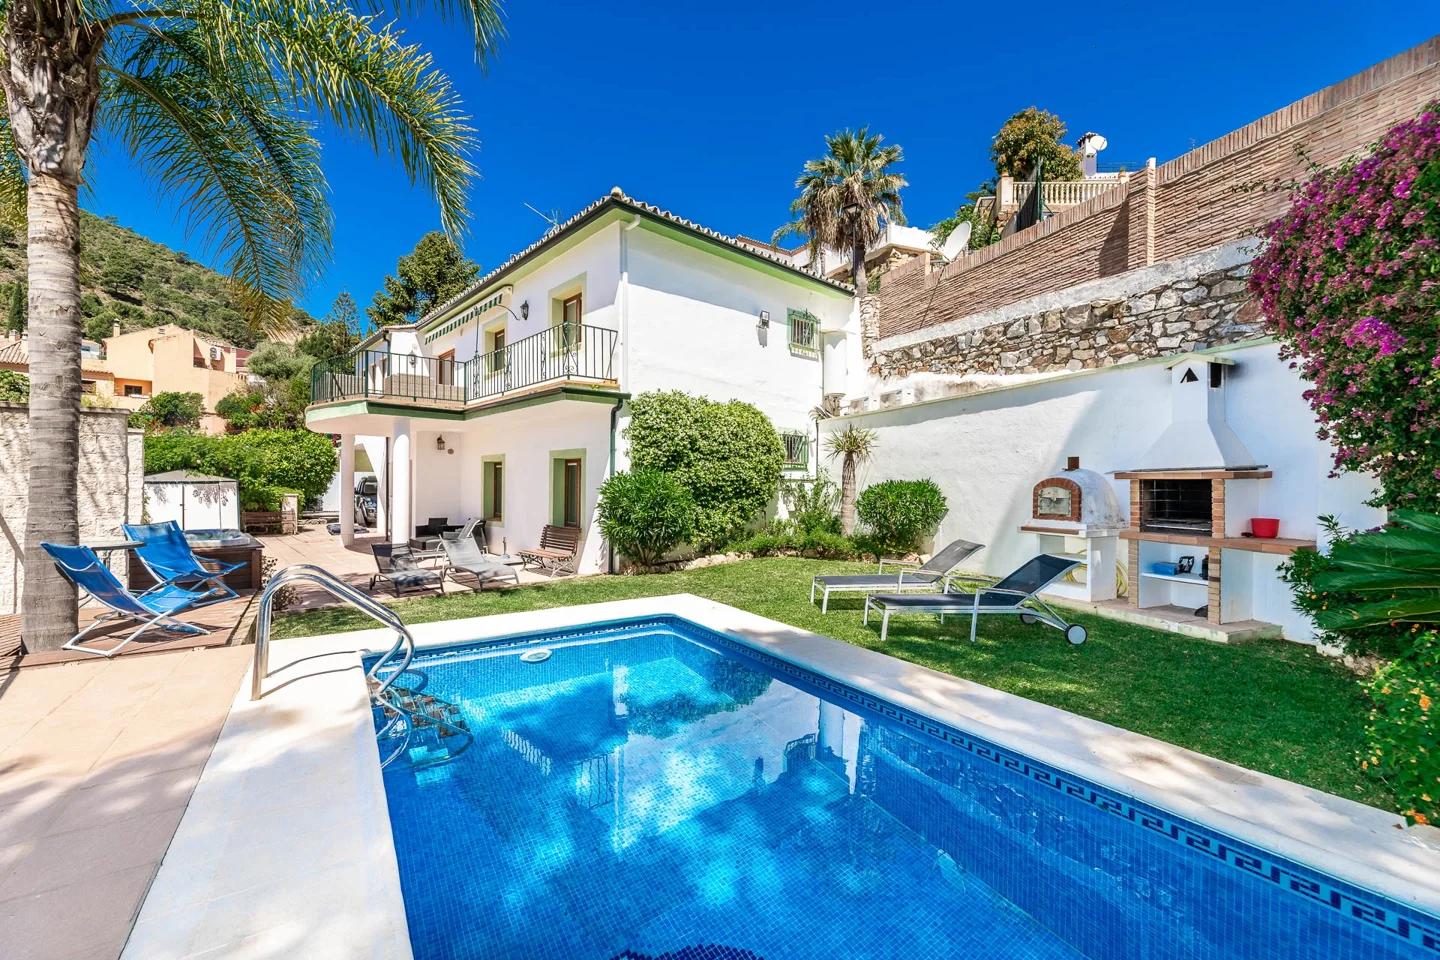 Benahavis Town: Charming villa with private pool and panoramic views